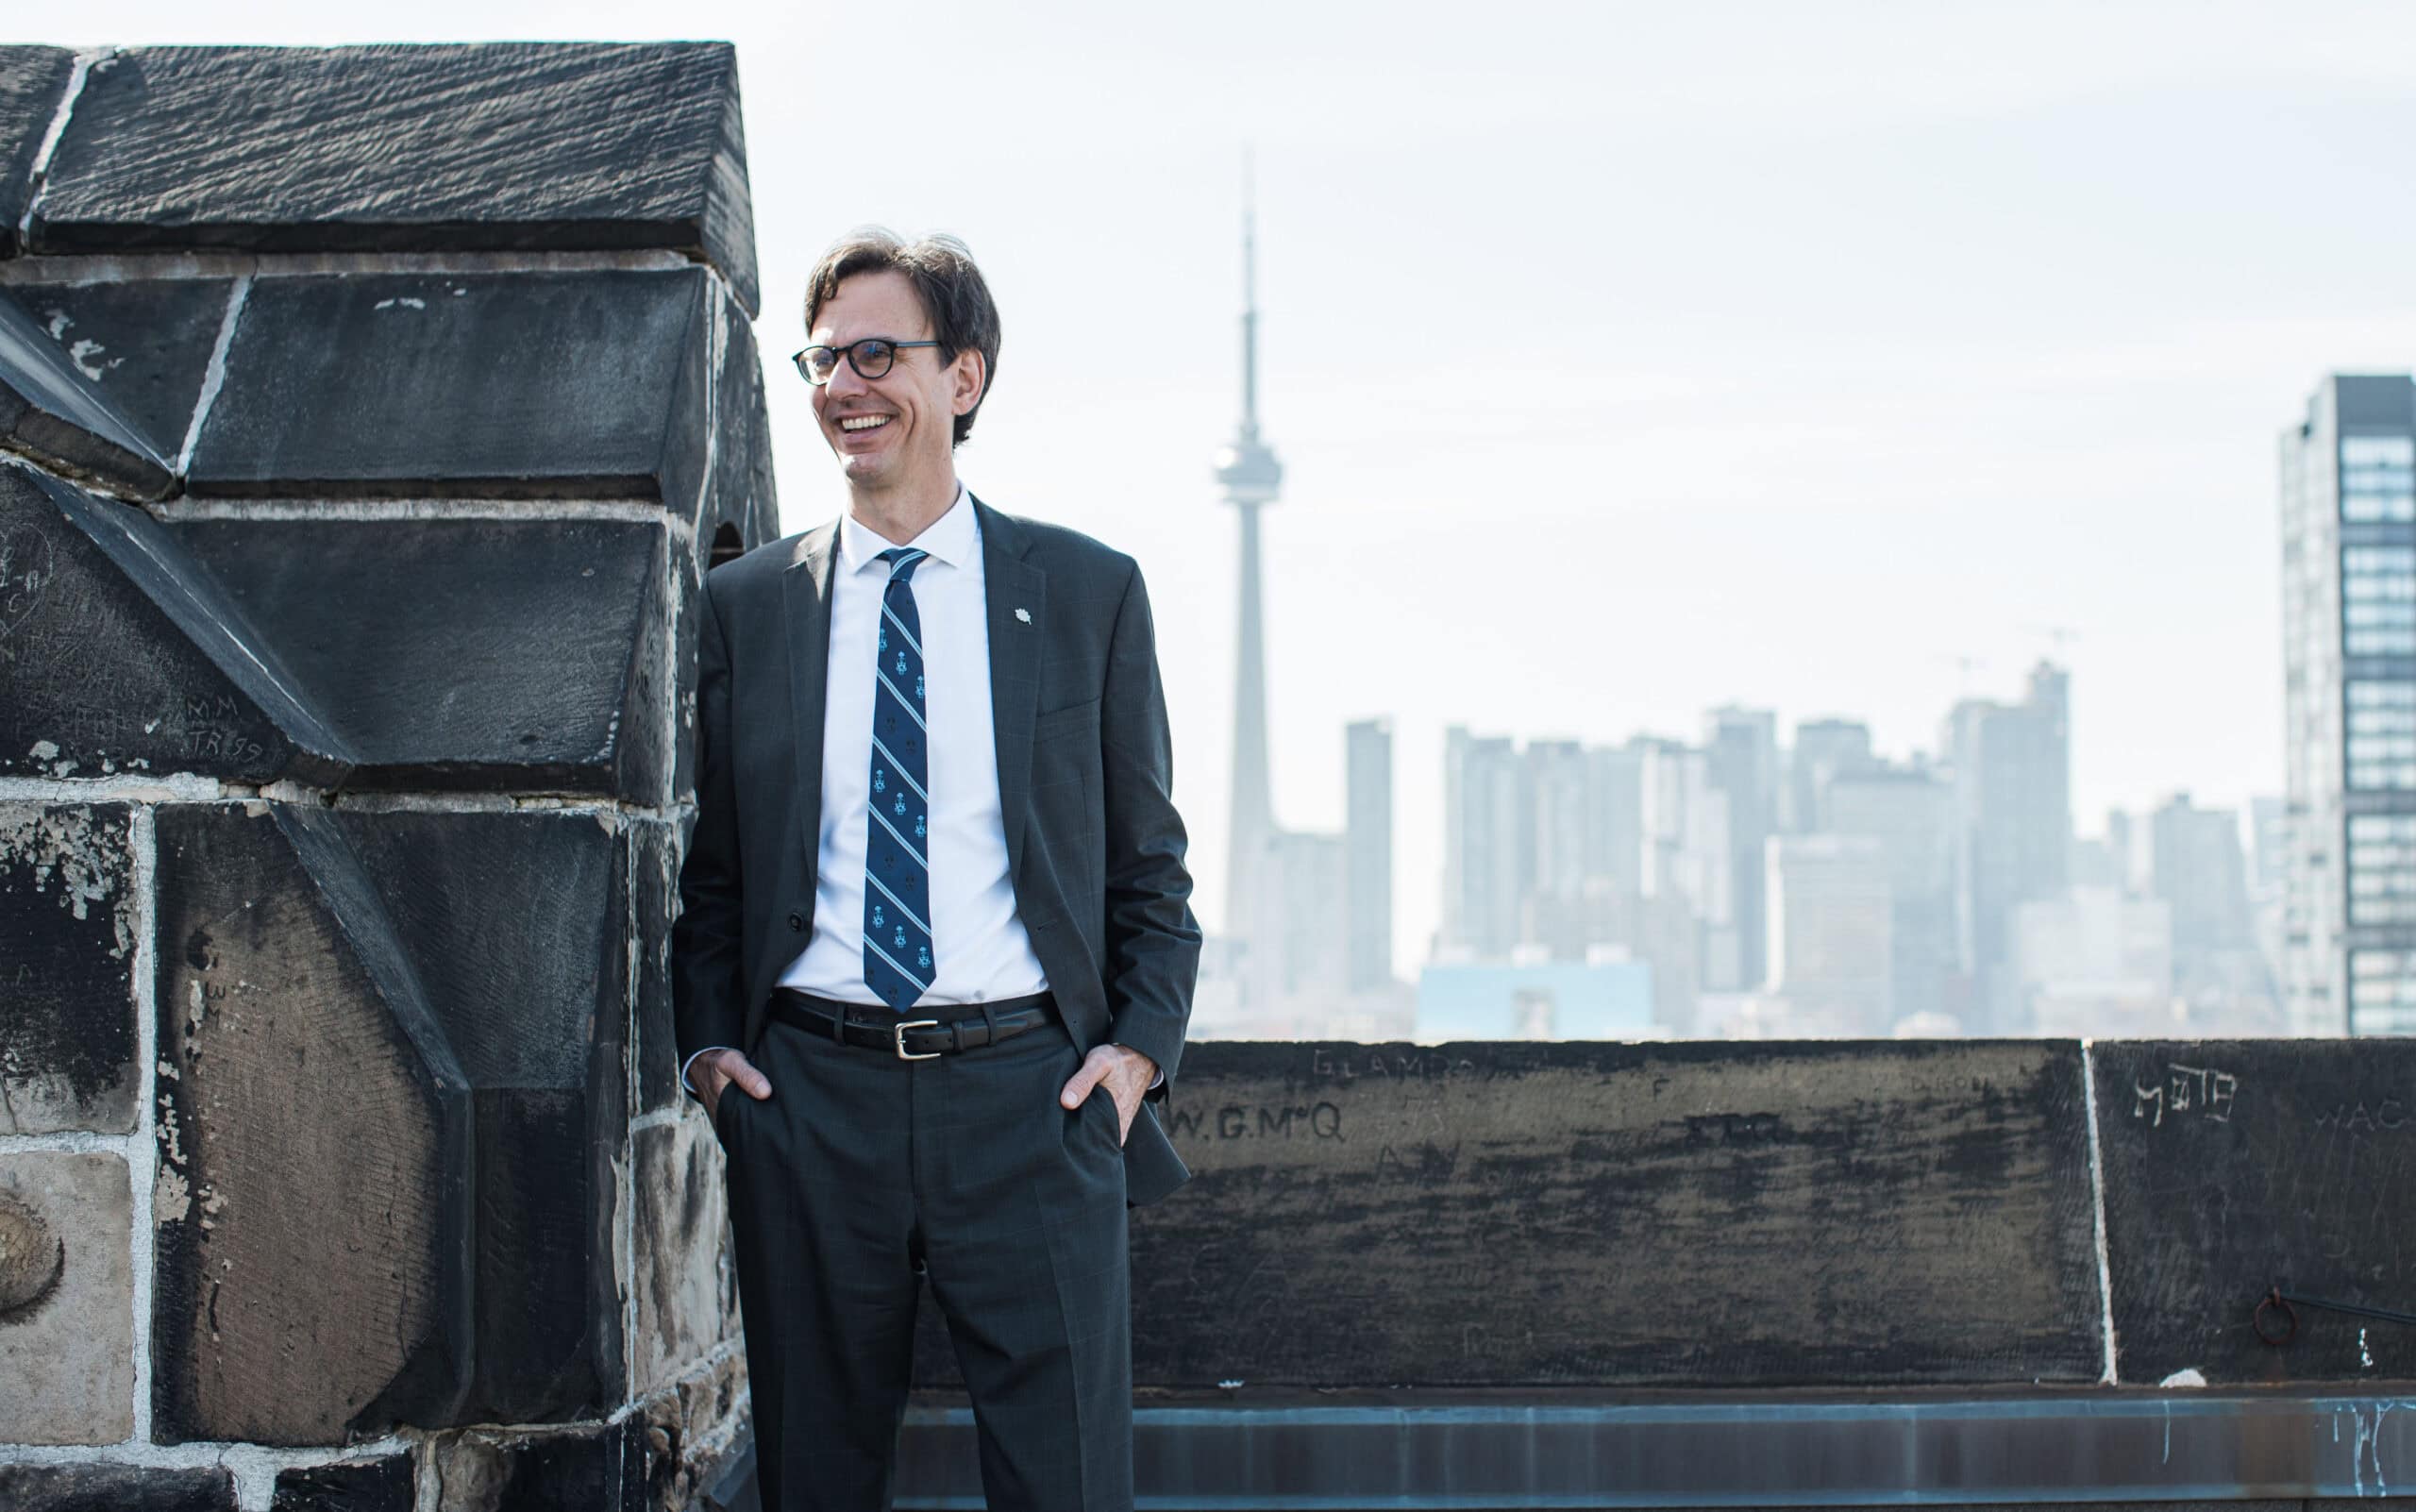 Corwin Cambray stands on a rooftop patio wearing a suit, smiling, with the CN Tower in the background.